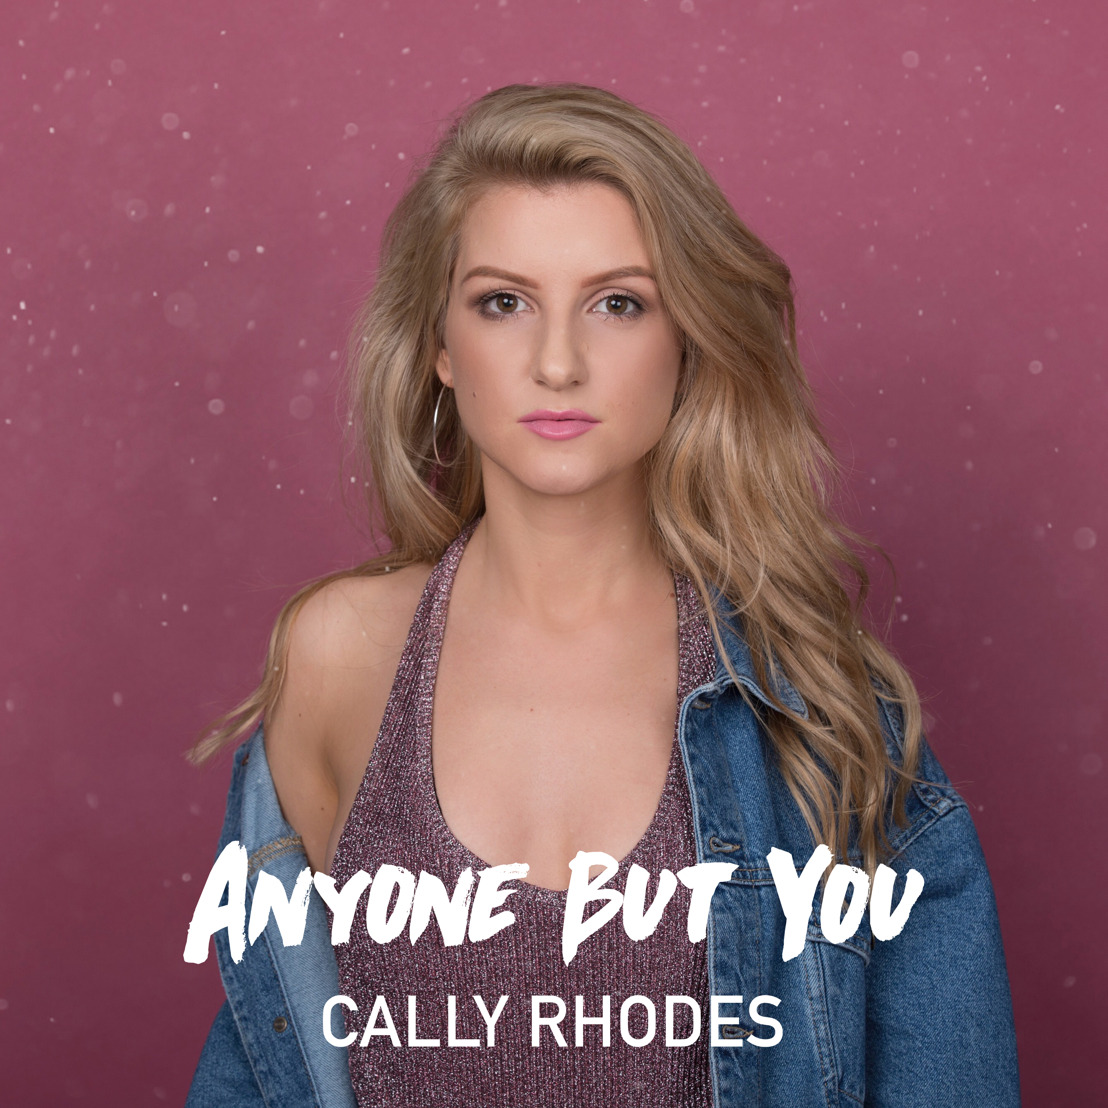 West Wales singer, Cally Rhodes releases new single, Anyone But You